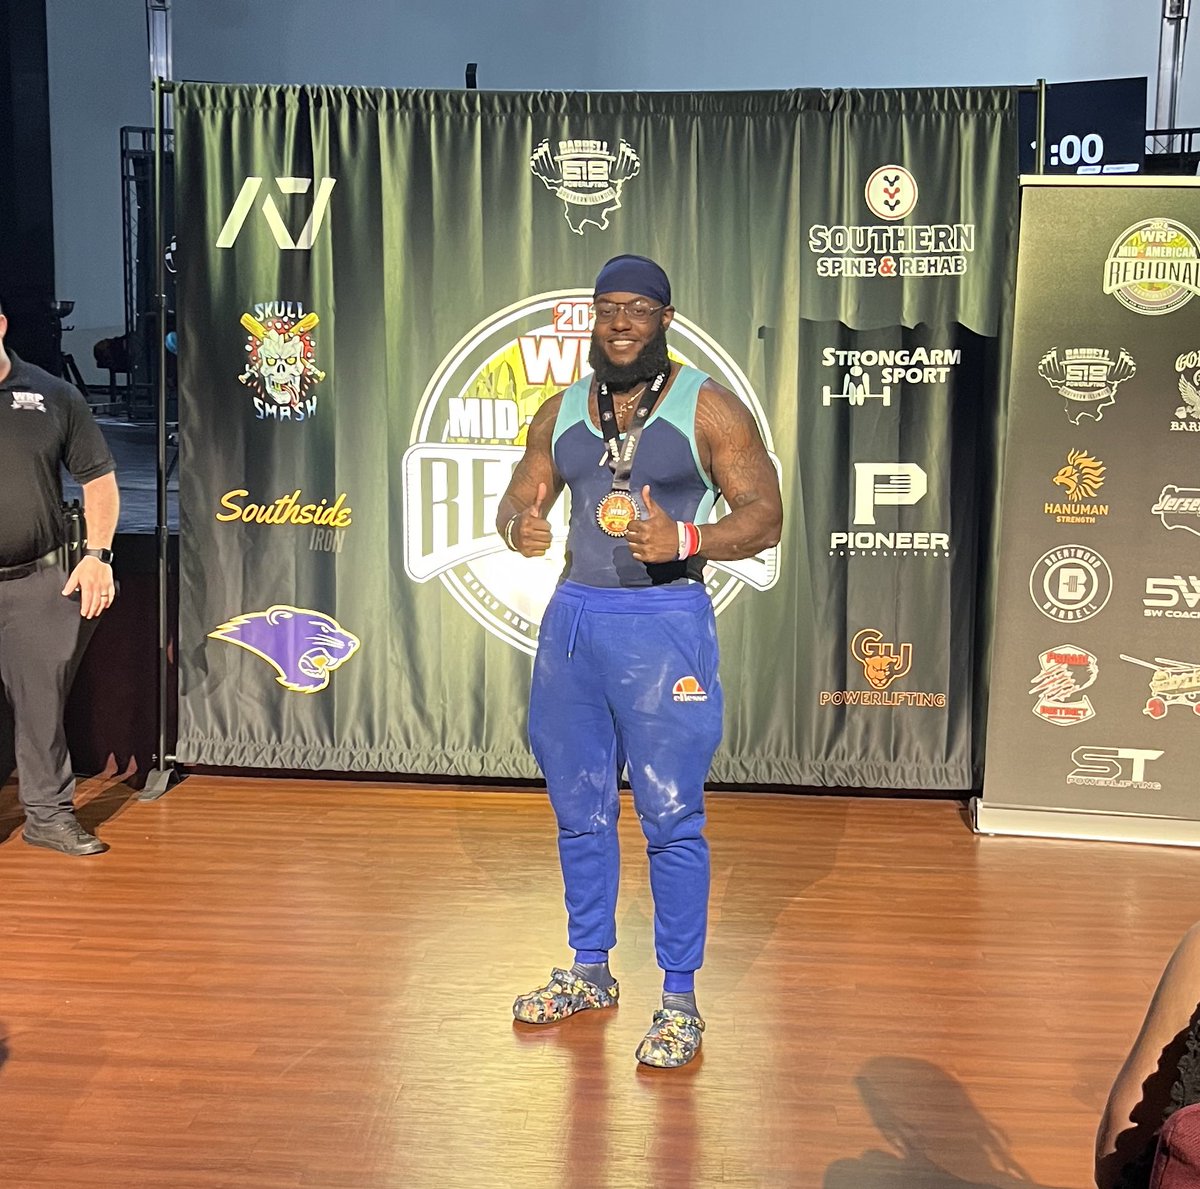 The meet was crazy. Second place in mens 100kg 🙏🏾 Qualified for nationals. On to the next 🧱❌🧱